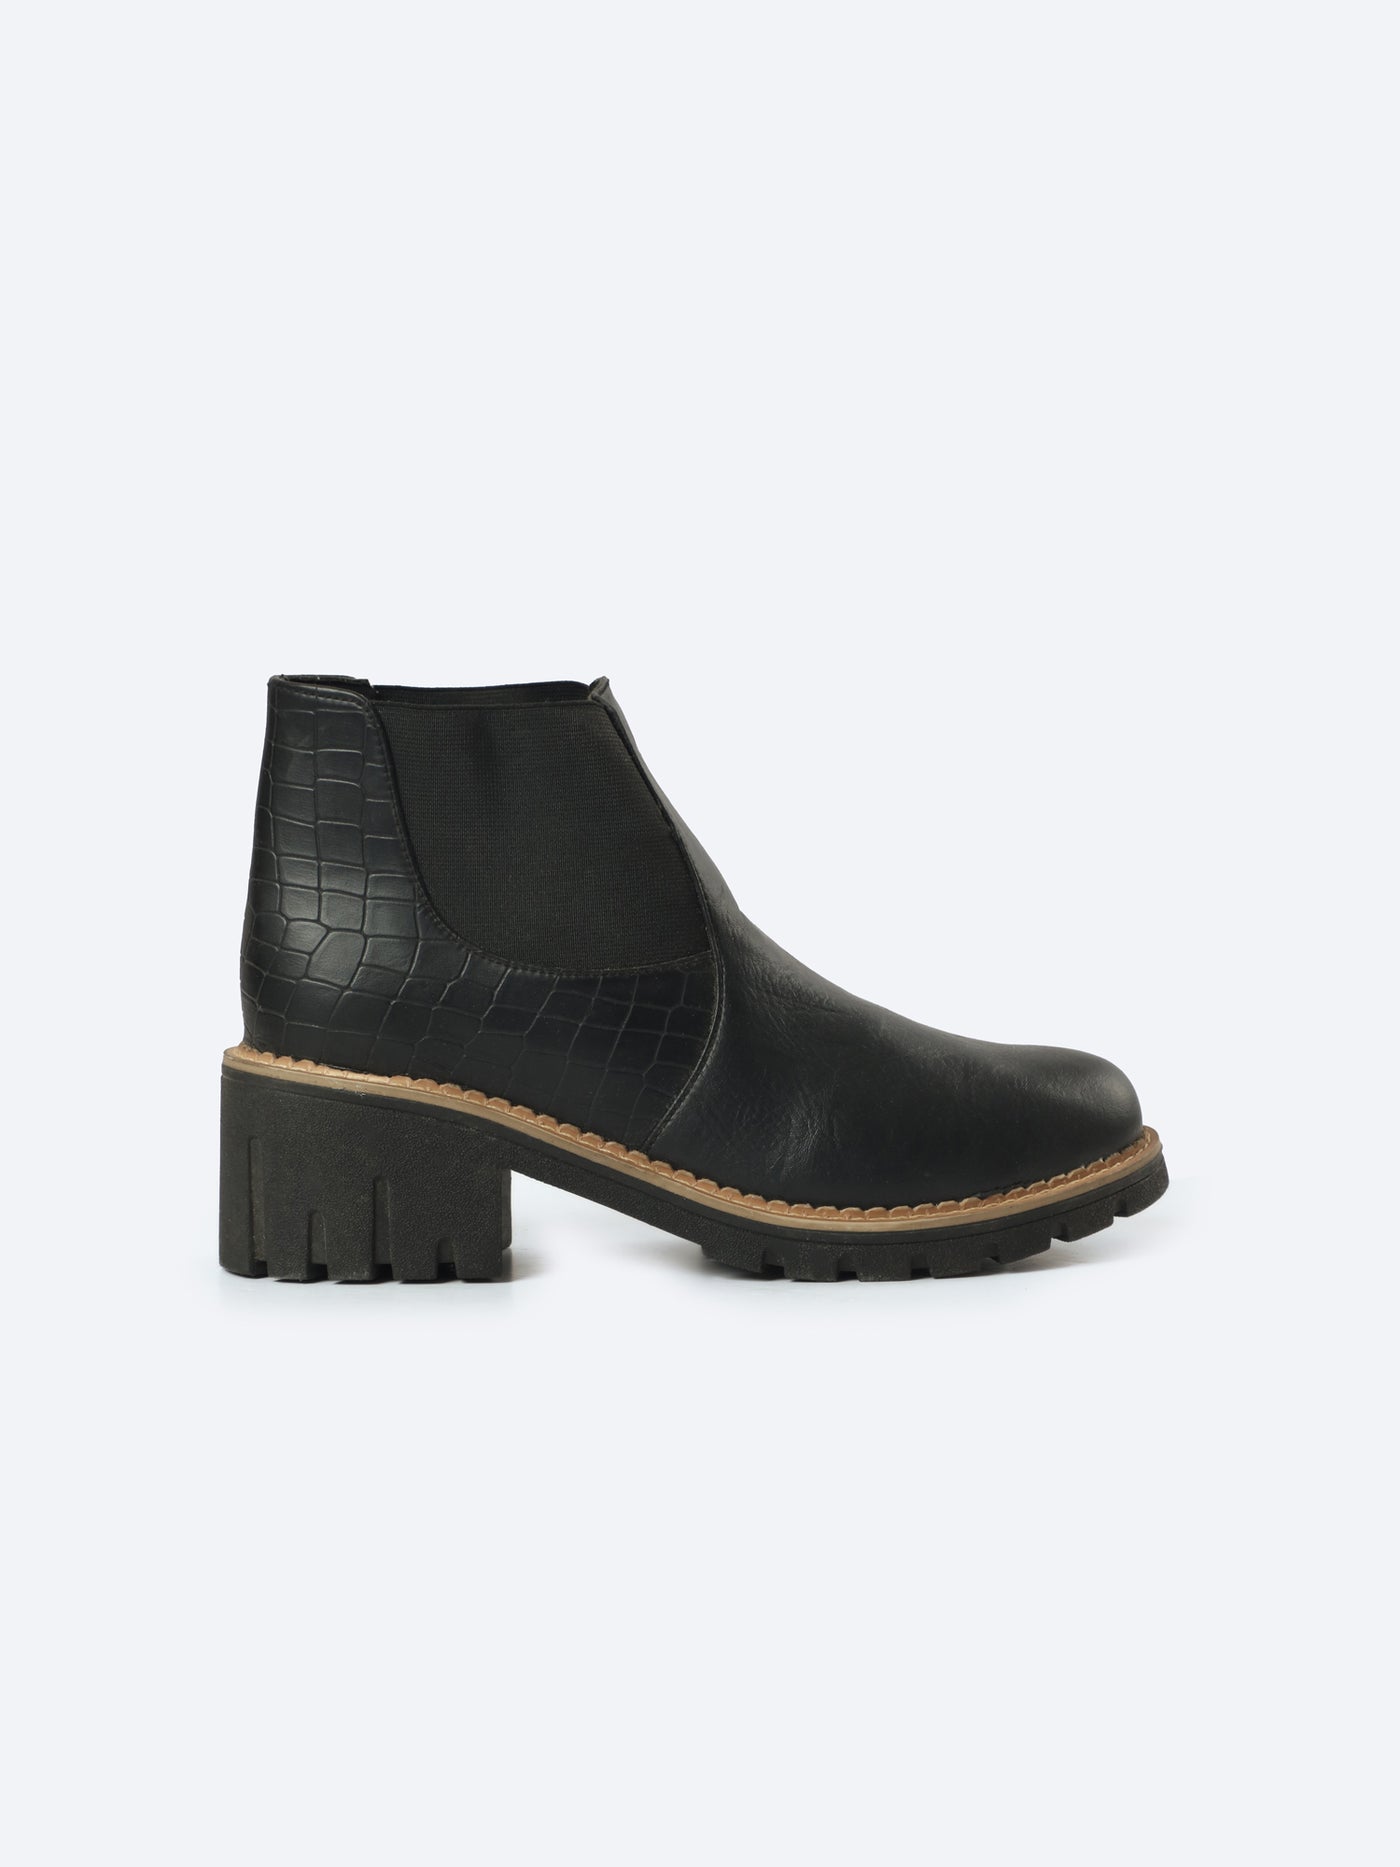 Ankle Boots - Crocodile Pattern - Elasticated